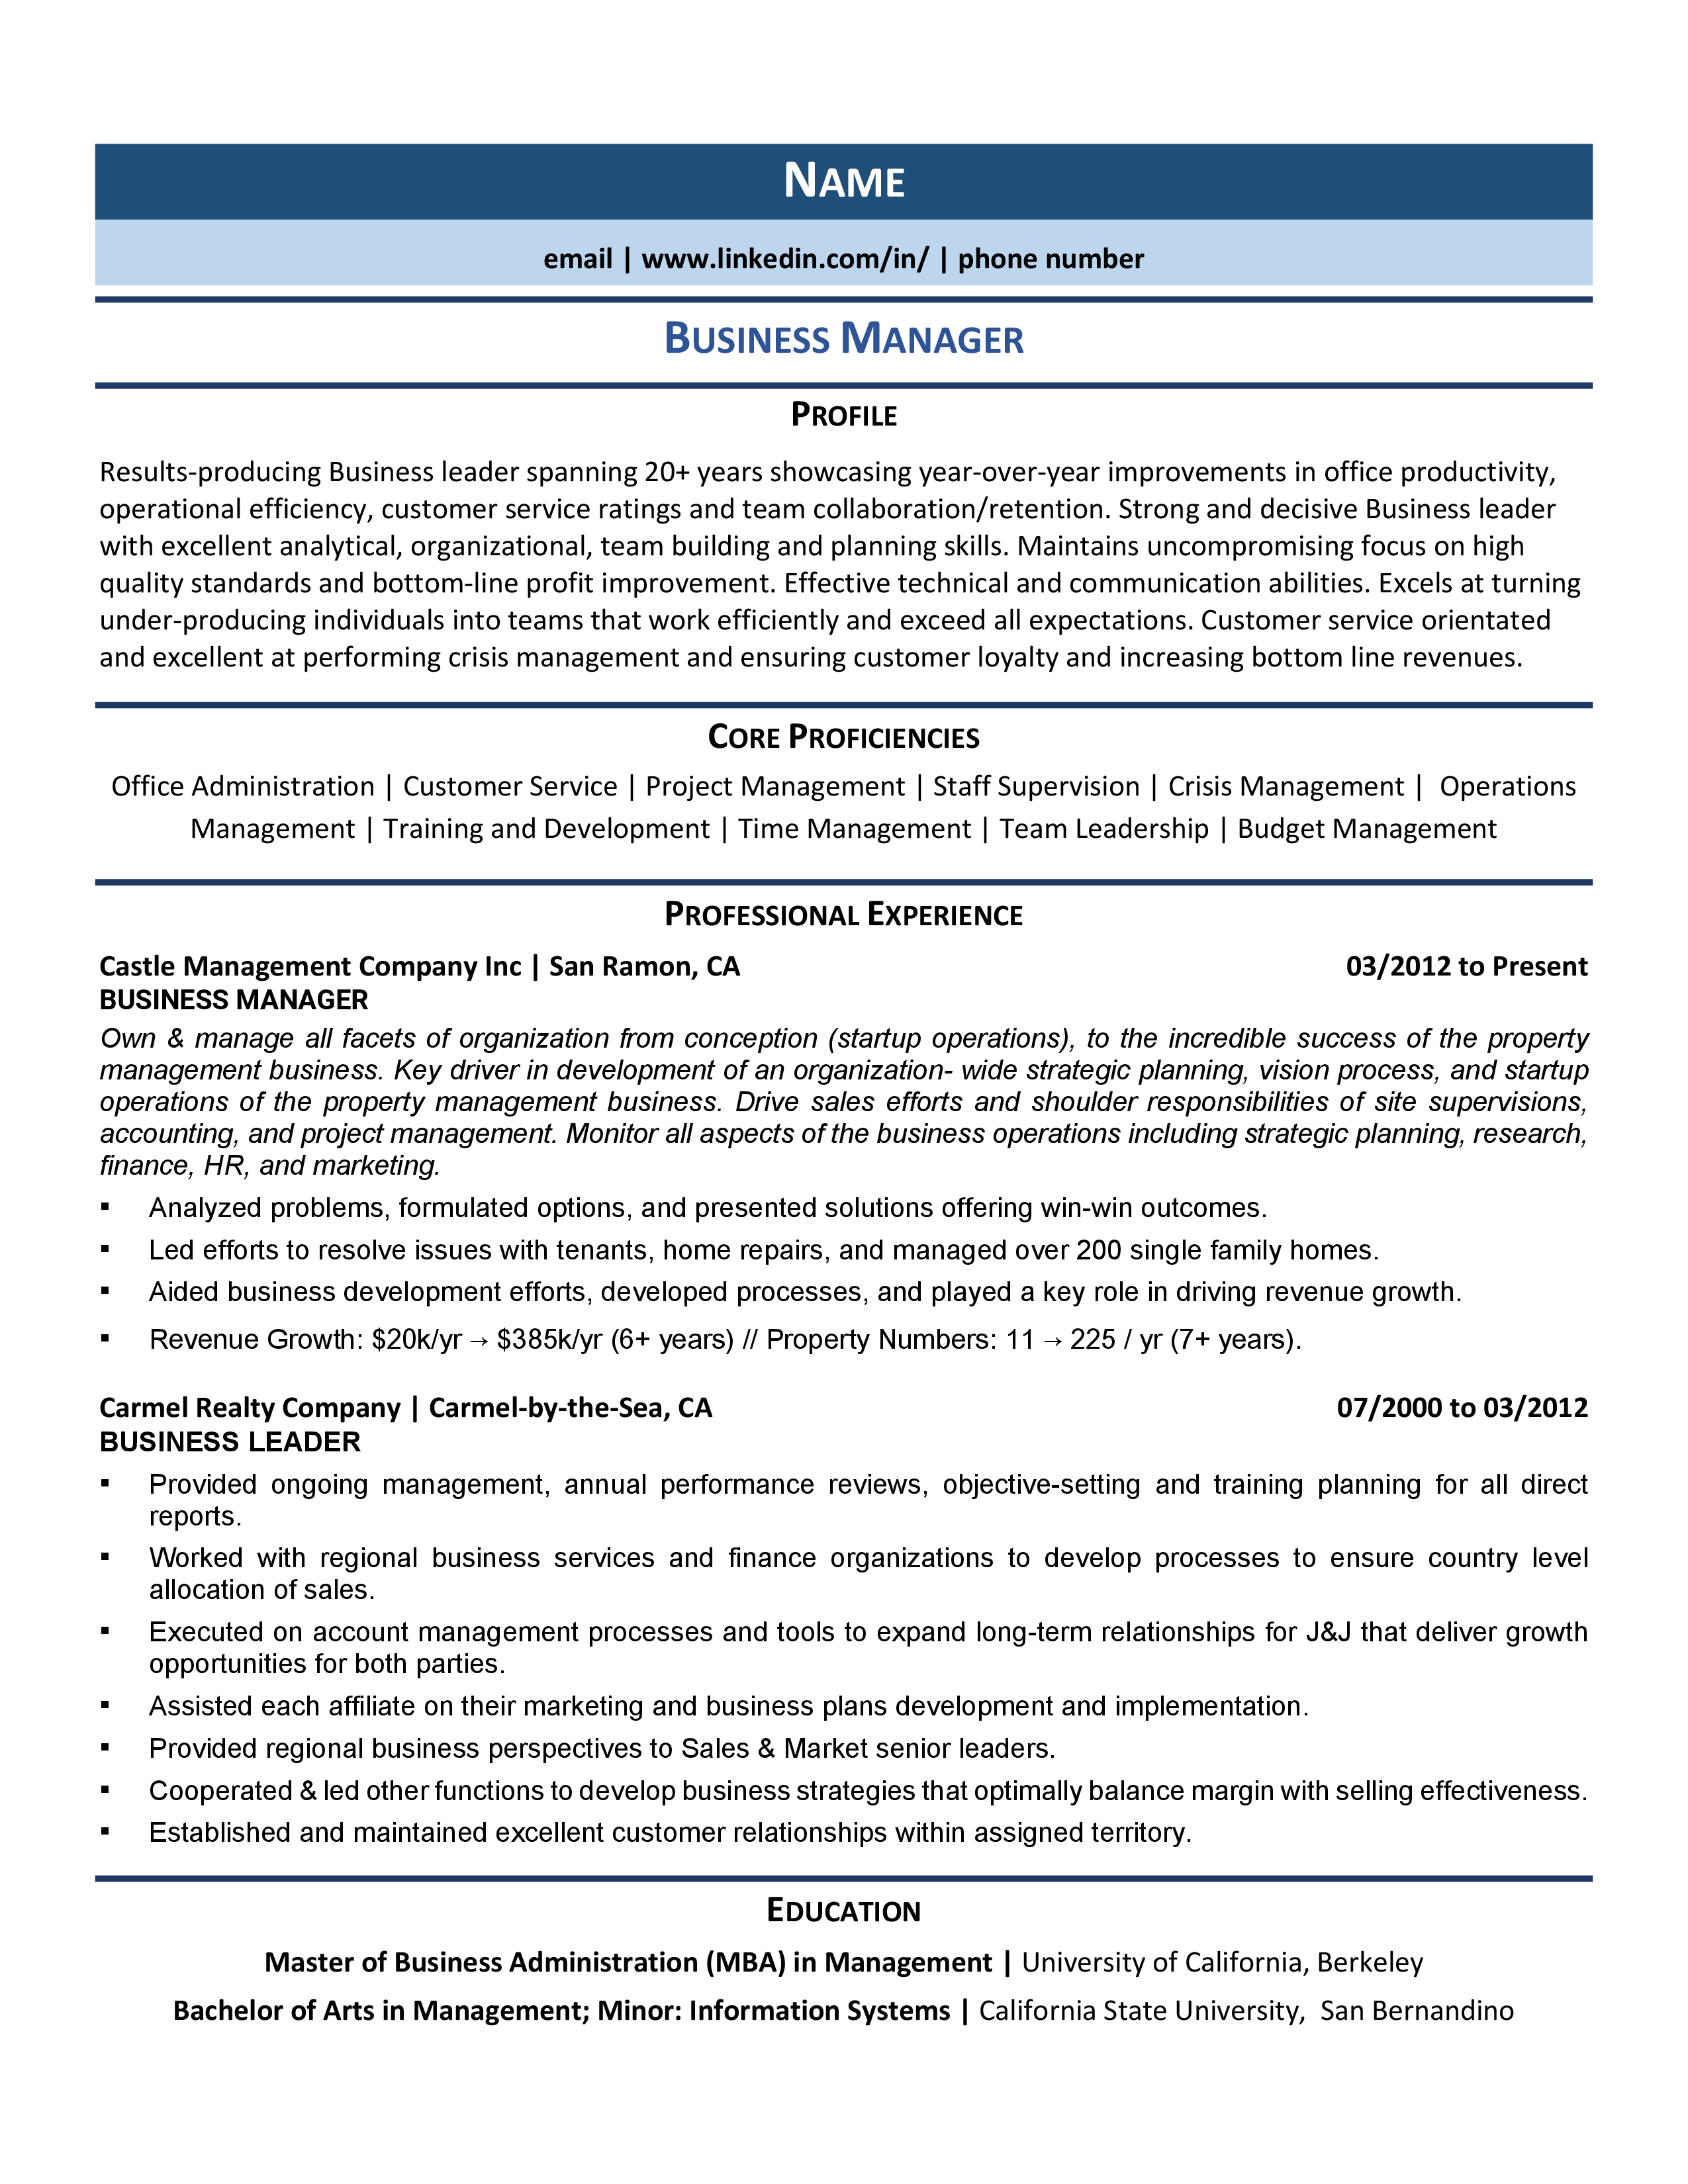 cool resume templates for managers